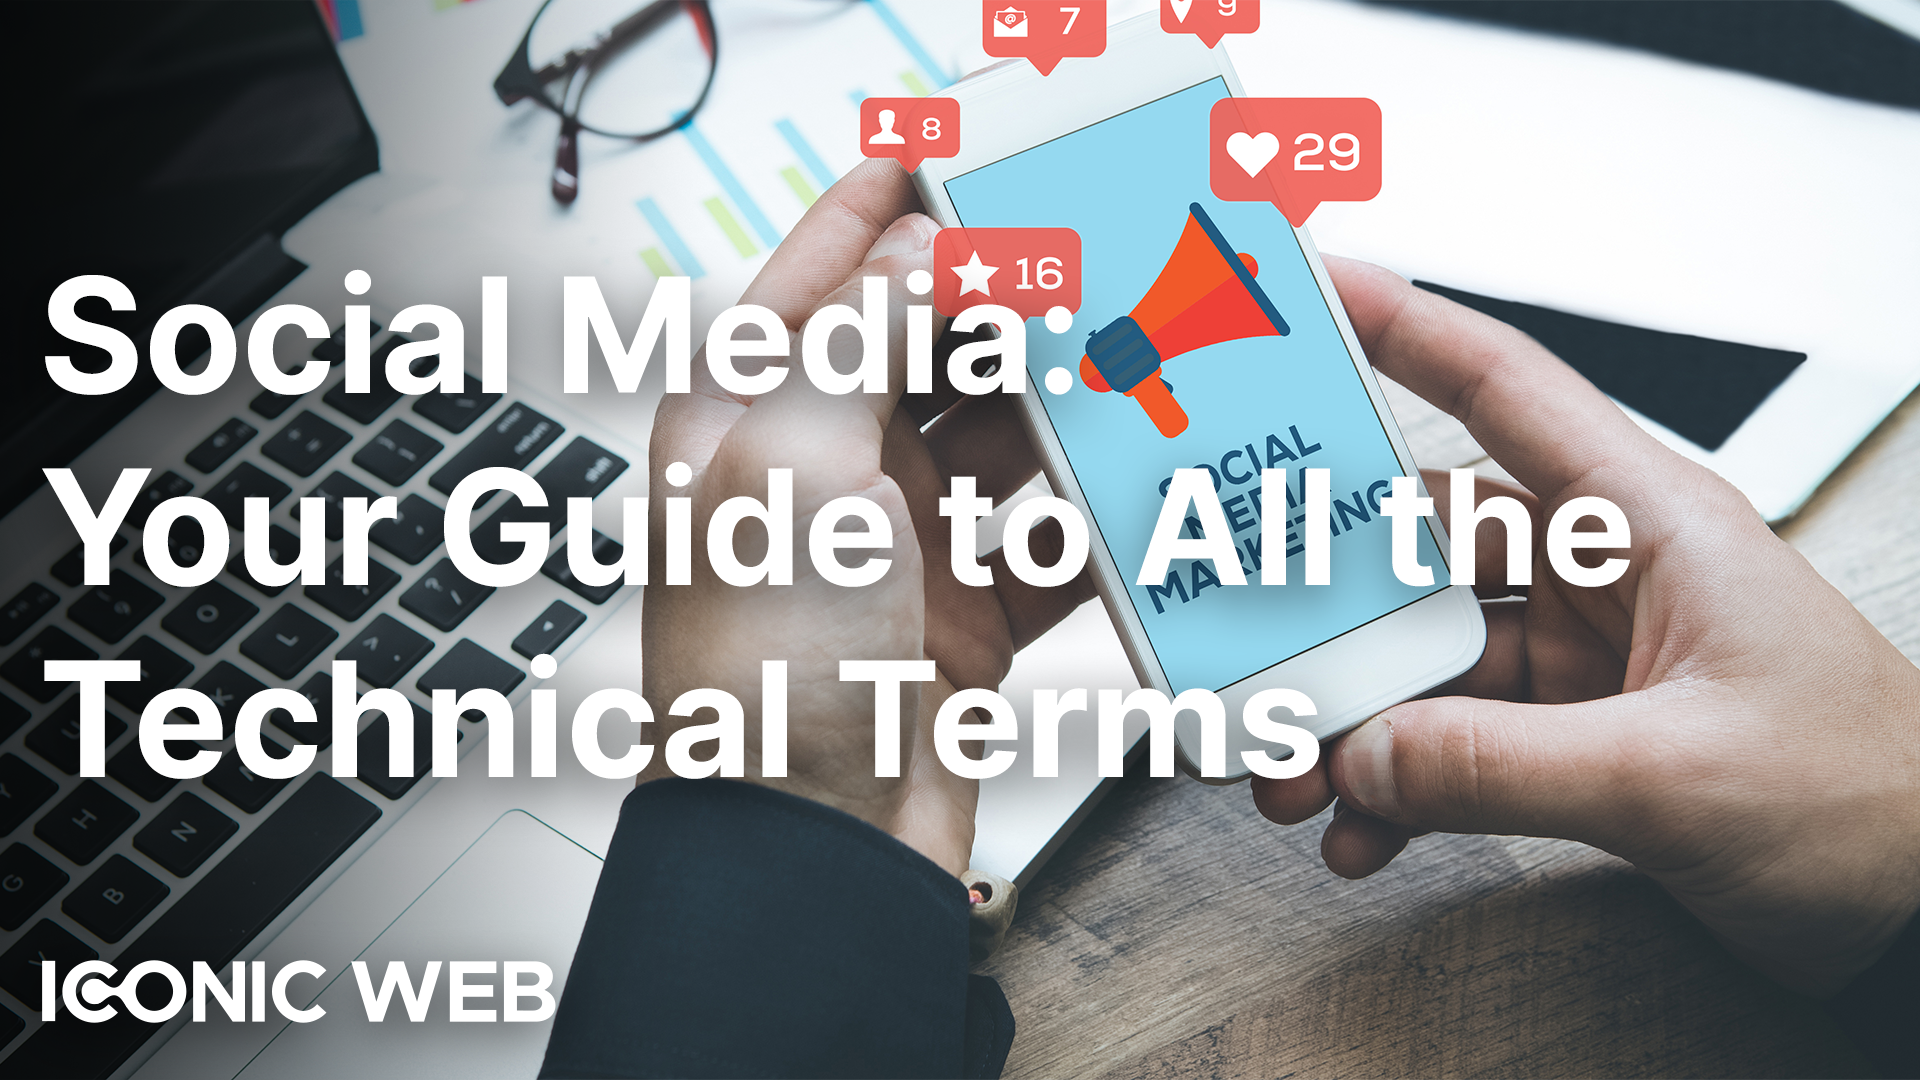 Social Media – Your Guide to All the Technical Terms